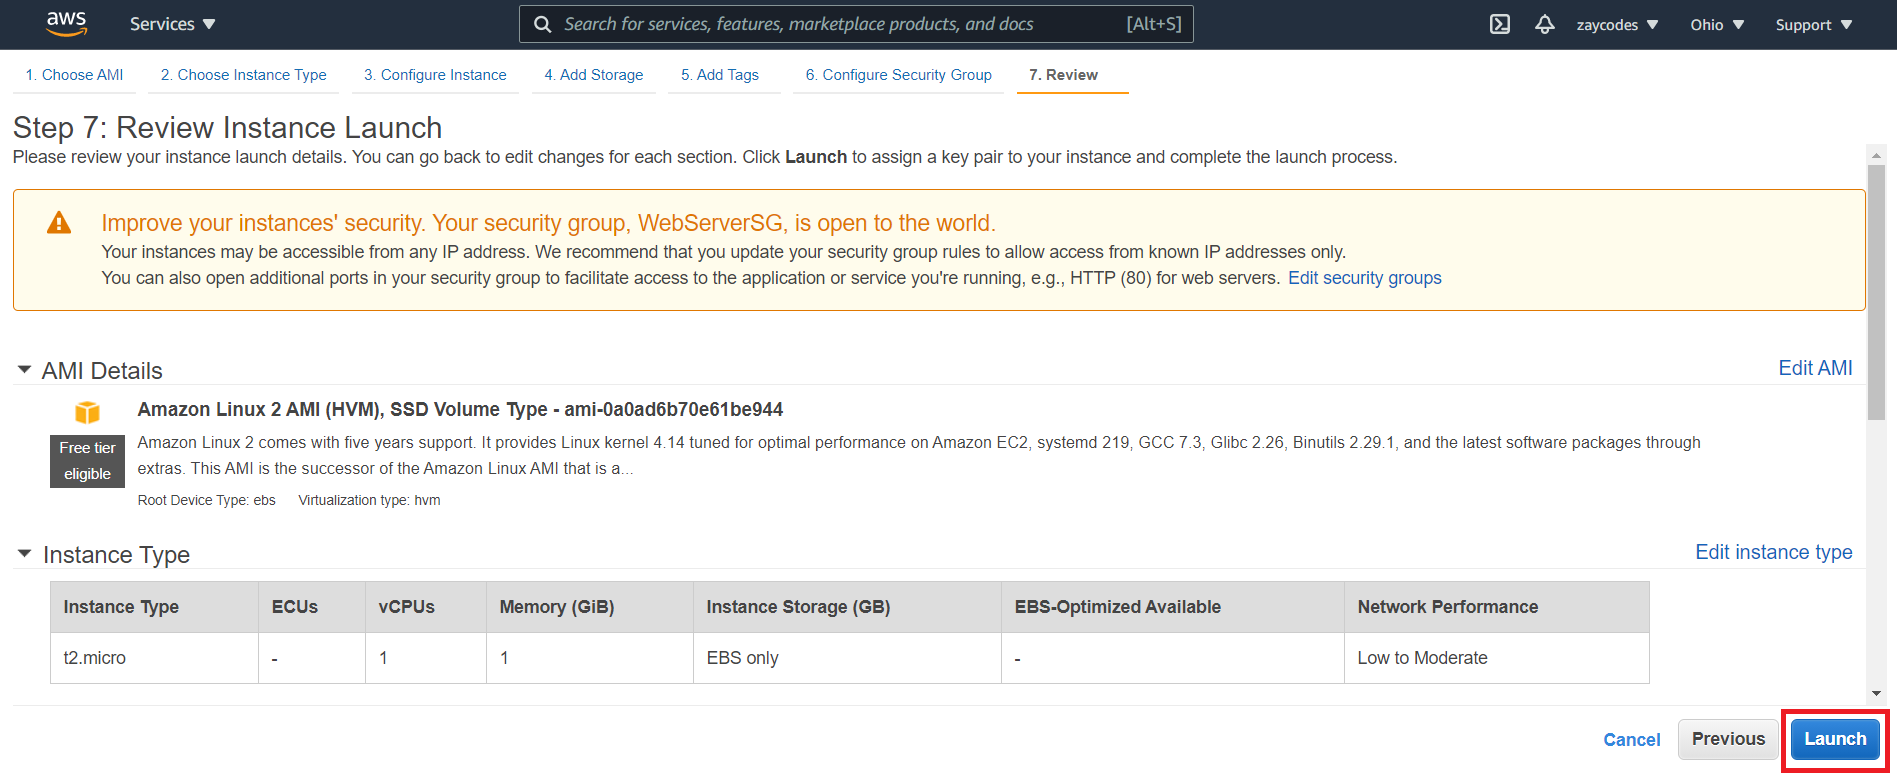 AMazon review your instance prior to launch